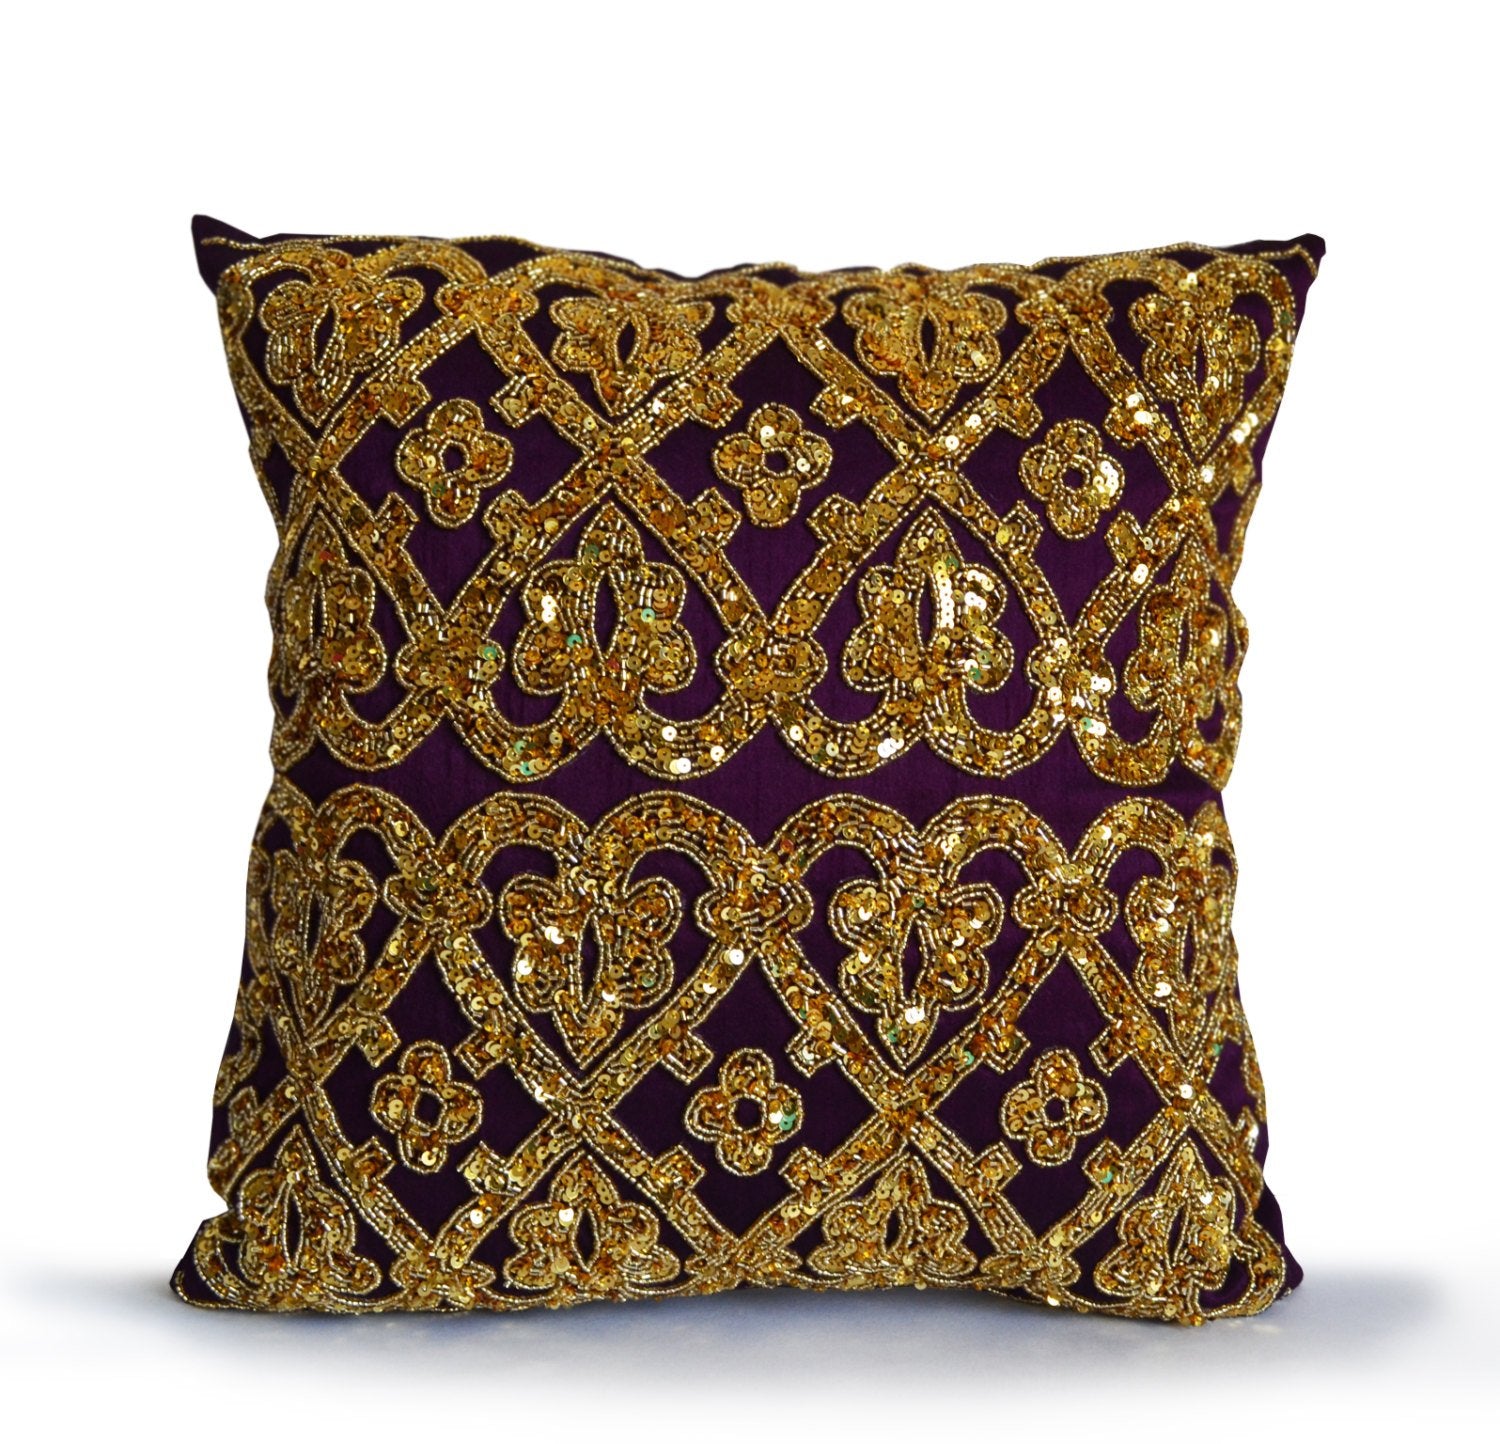 Amore Beaute Purple geometric throw pillows with bead sequins detail.